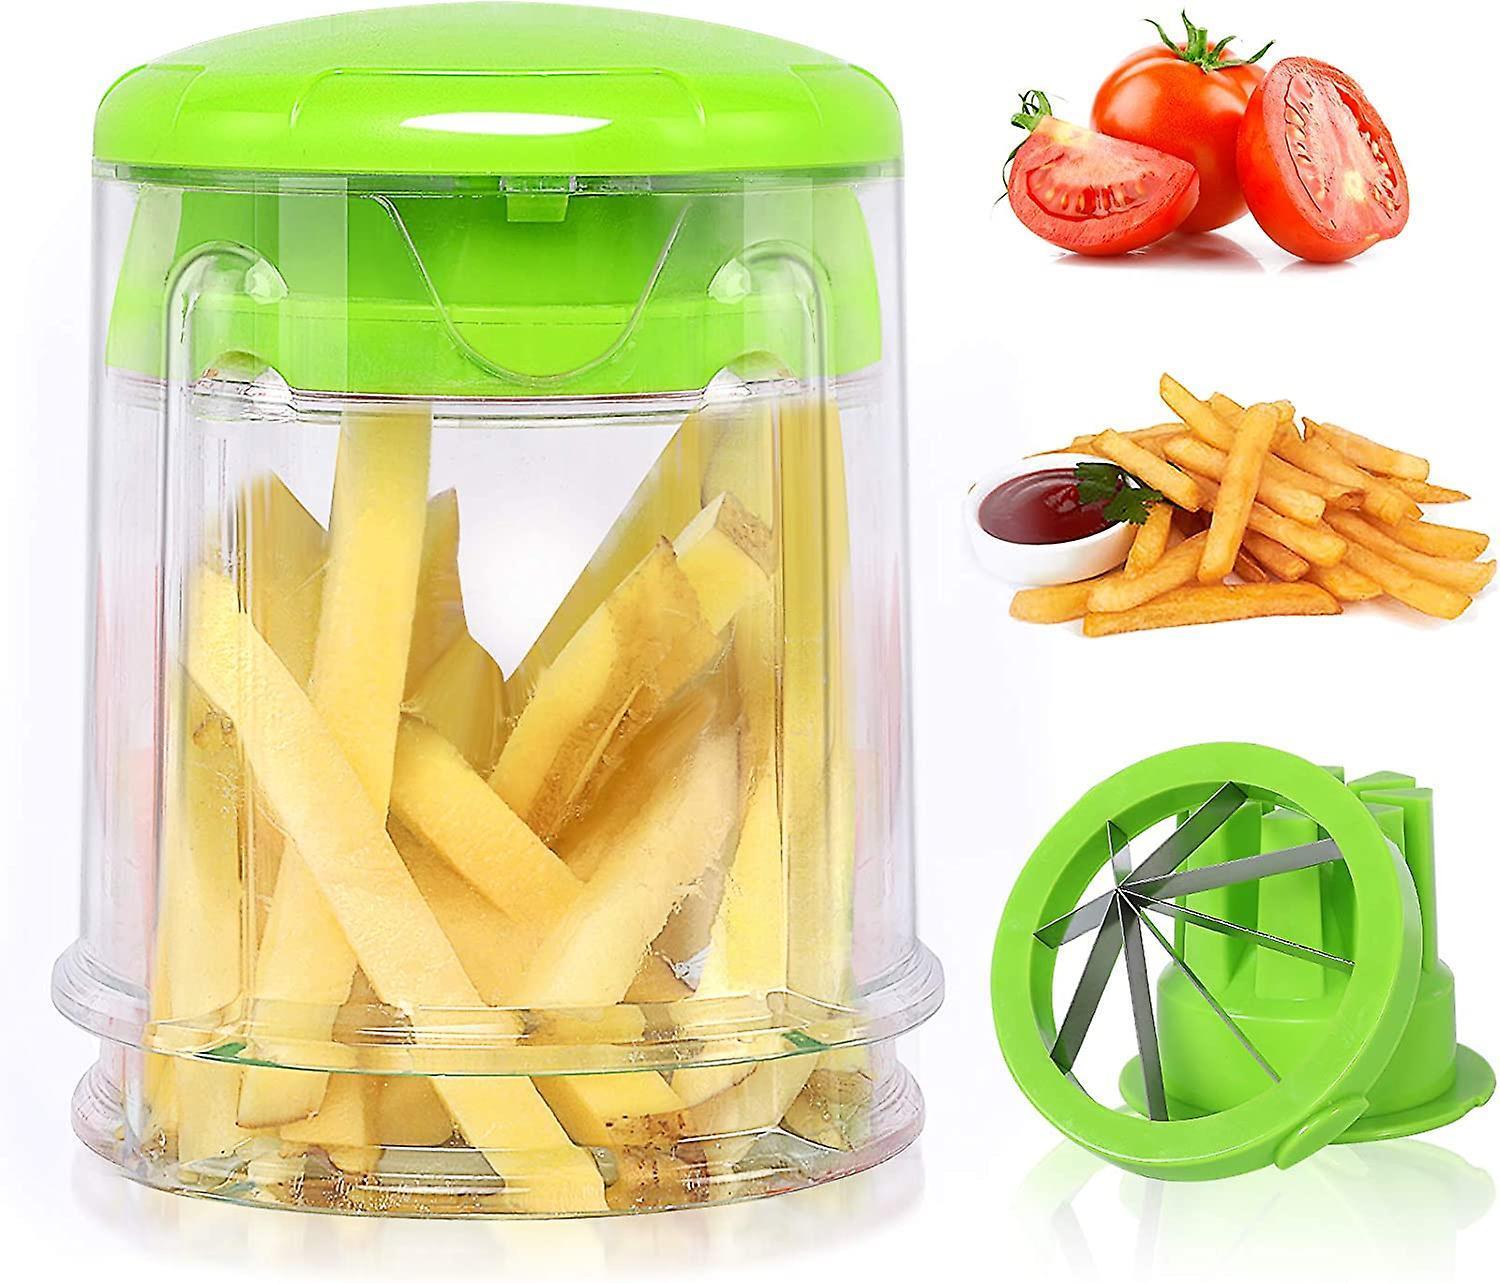 French Fry Cutter Apple Cutter - Potato Apple Slicer Slices Tomatoes Onion Cucumbervery Easy To Clean As It Is Dishwasher Safe.